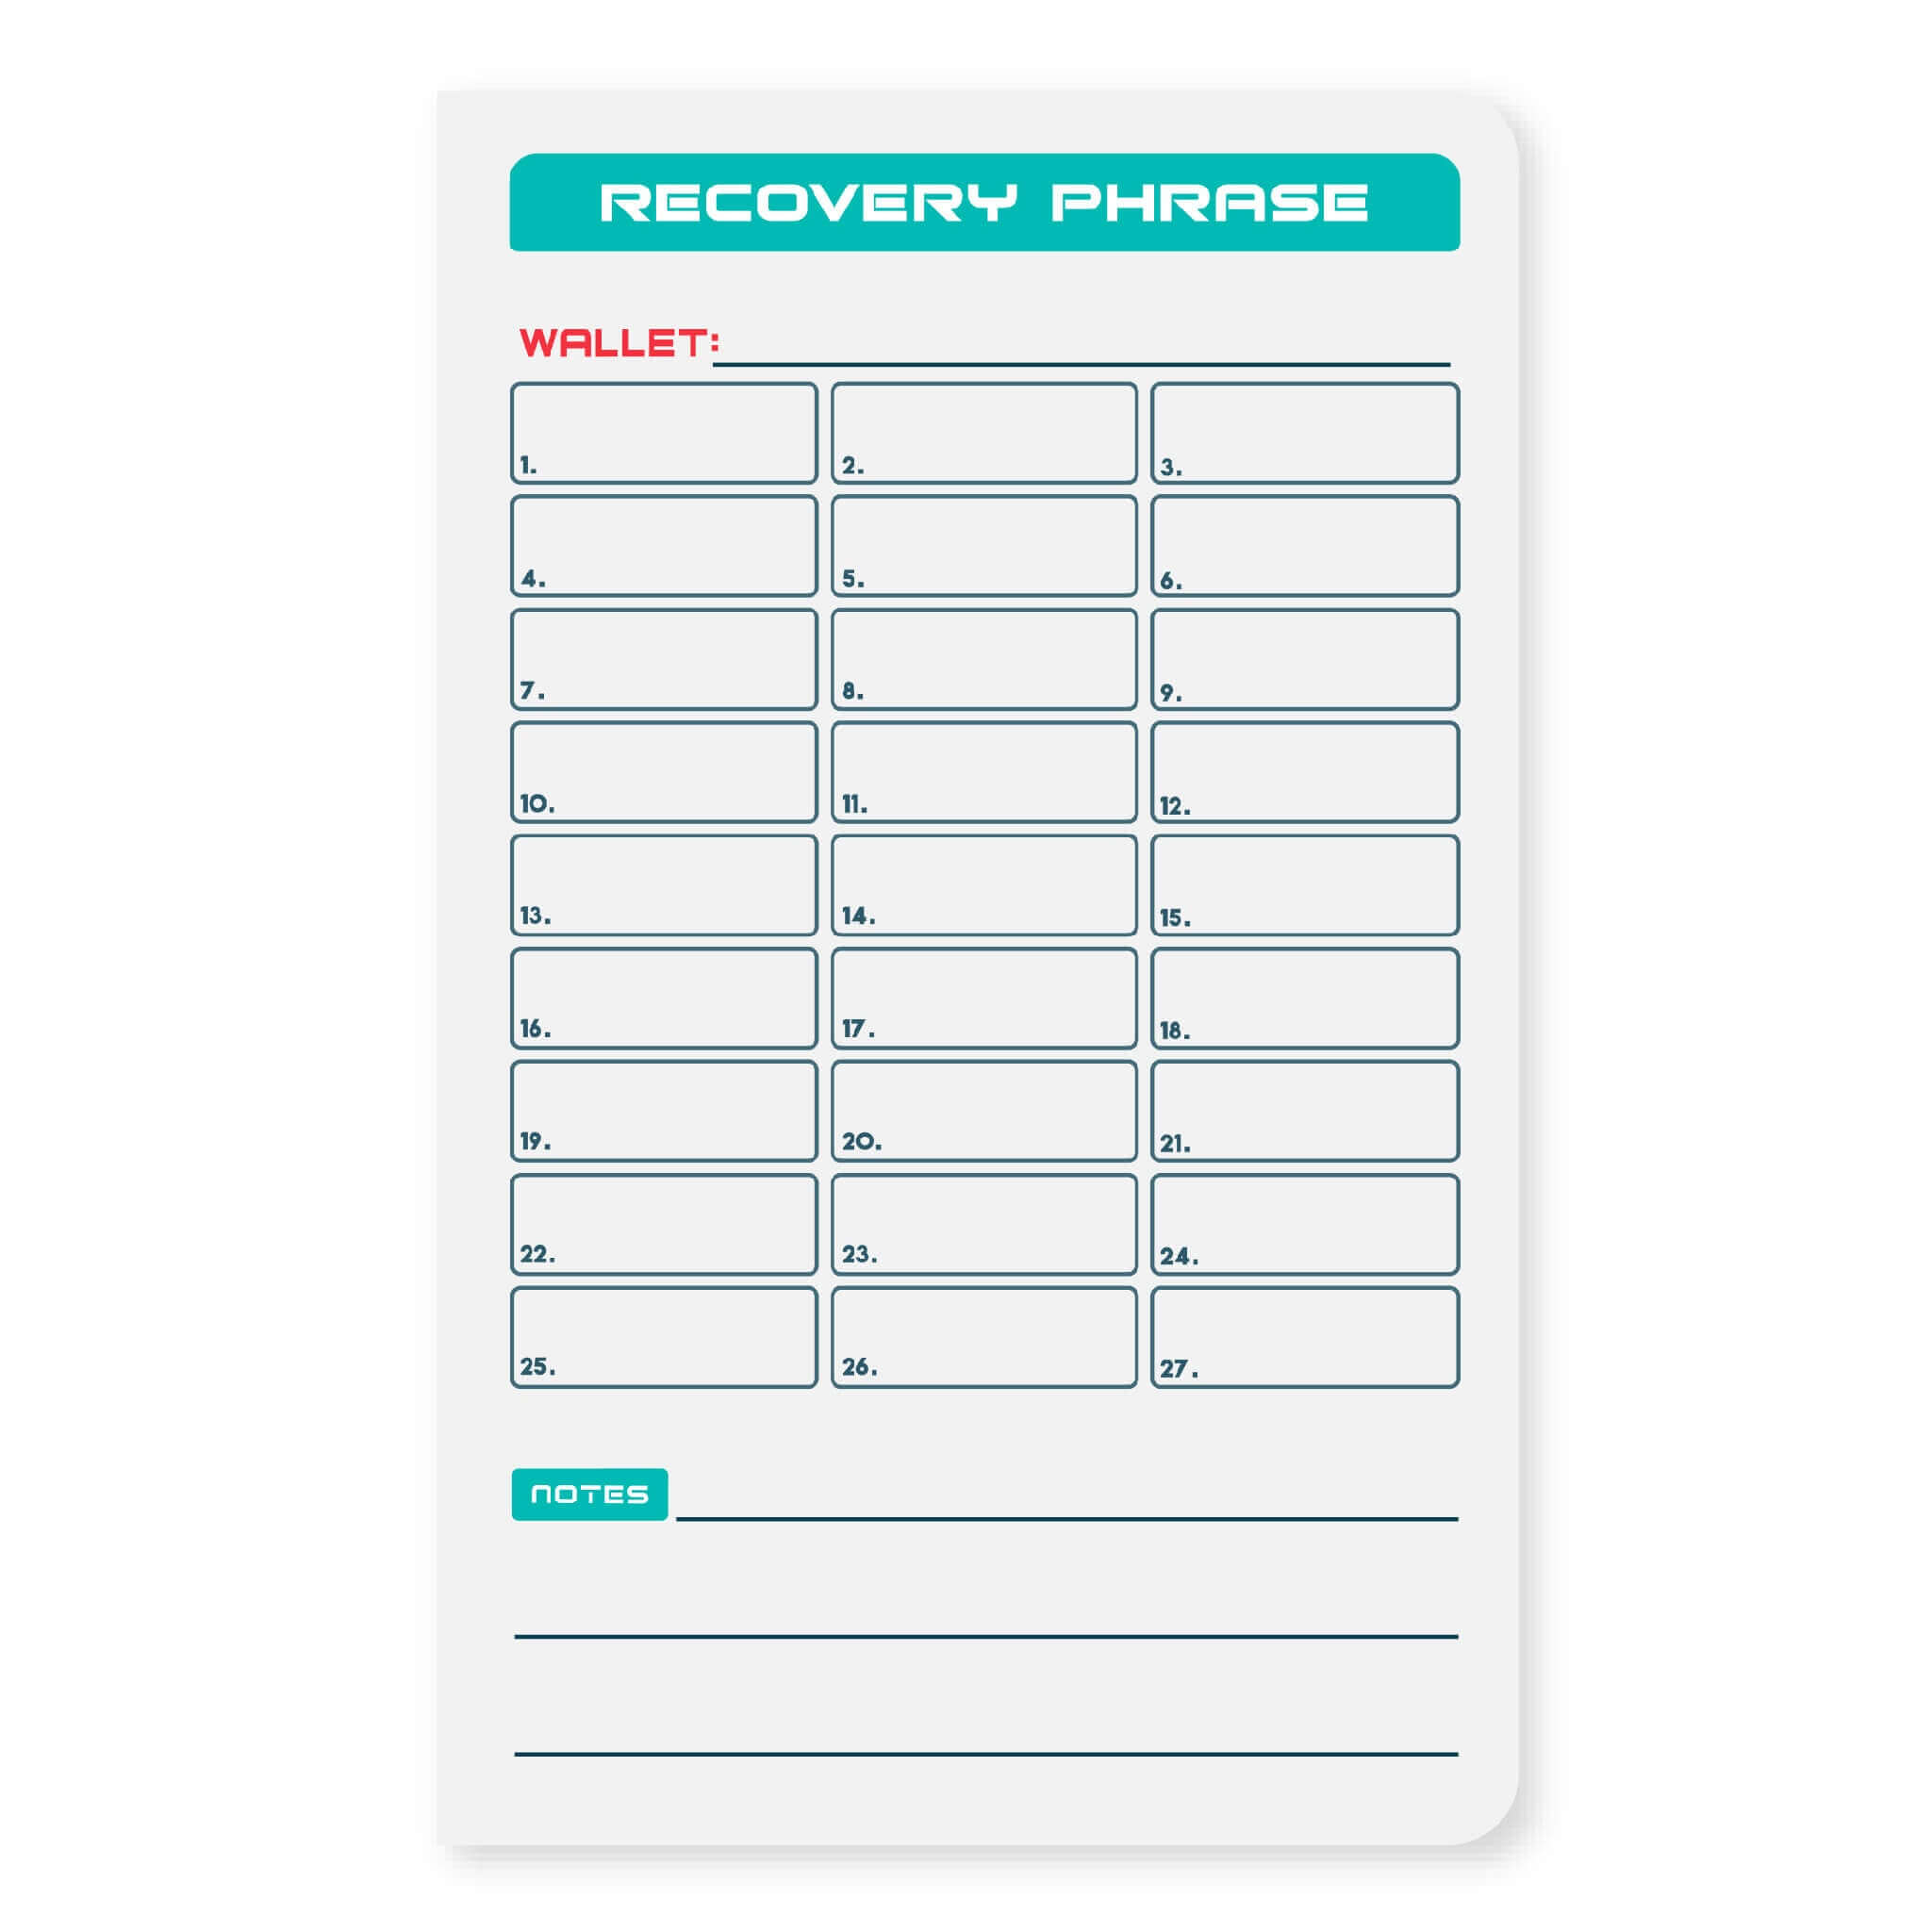 Recovery phrase page in the shieldfolio stonebook waterproof seed phrase notebook